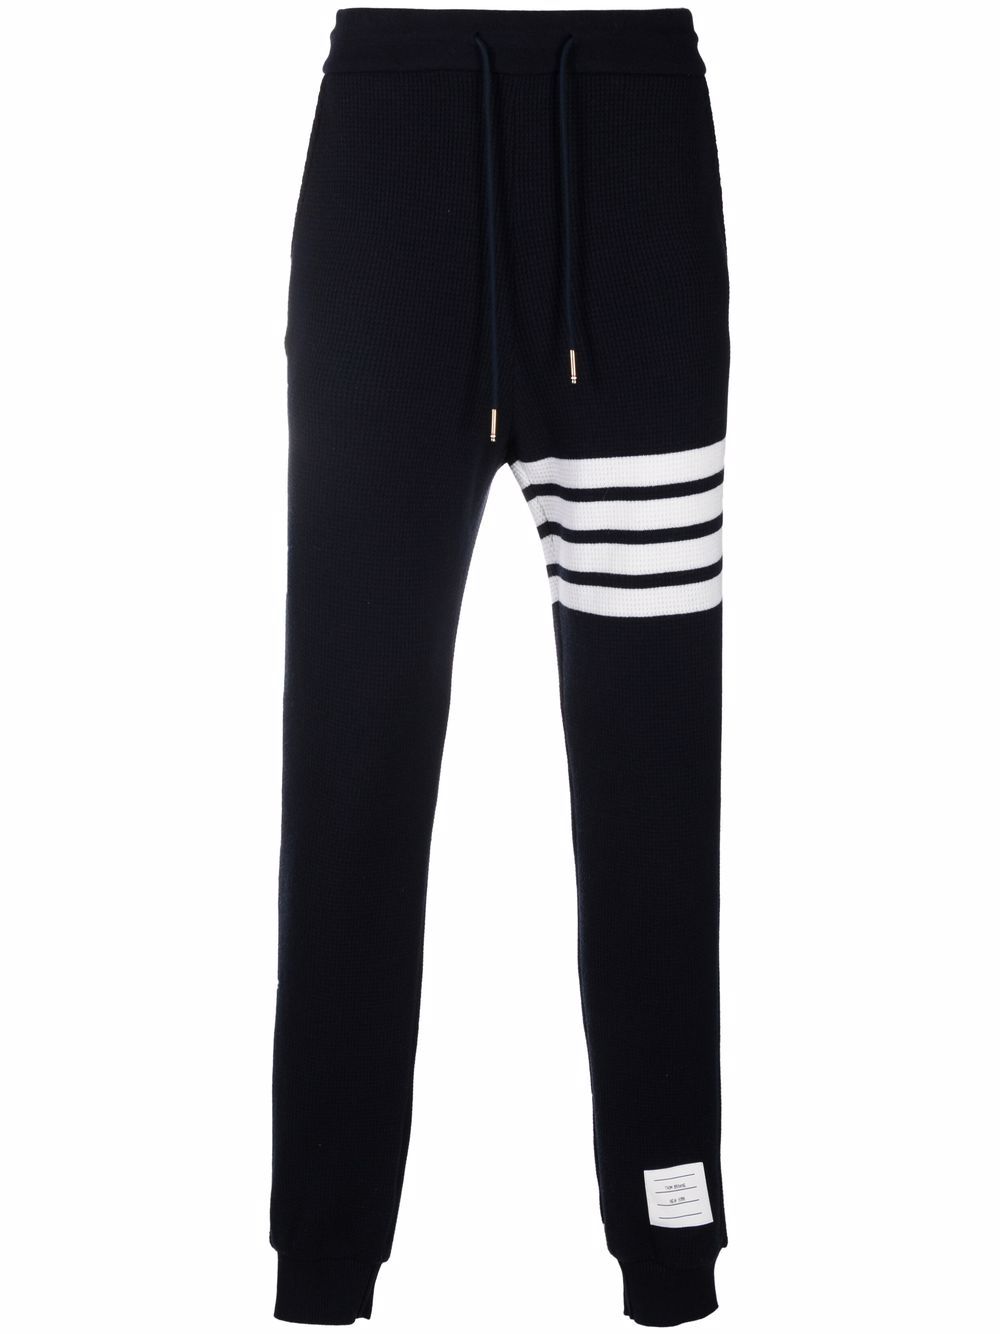 SWEATPANTS IN CASHMERE WOOL WAFFLE W/ ENG 4 BAR NAVY3